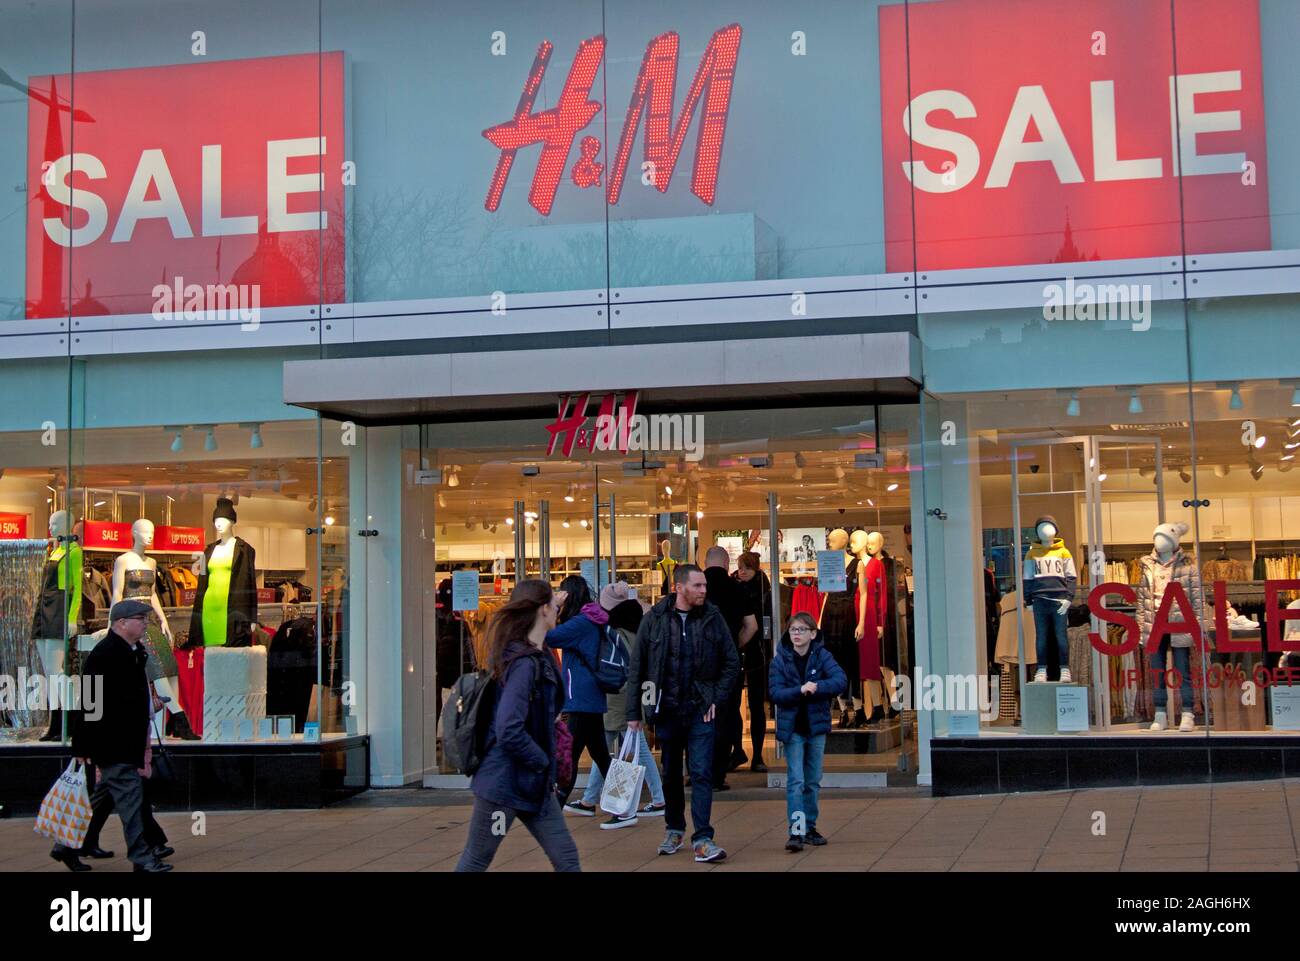 Princes Street, Edinburgh, Scotland, UK. 19th December 2019. H&M, With less  than a week to go until Christmas day the majority of the stores in Princes  Street are displaying Sale signs with